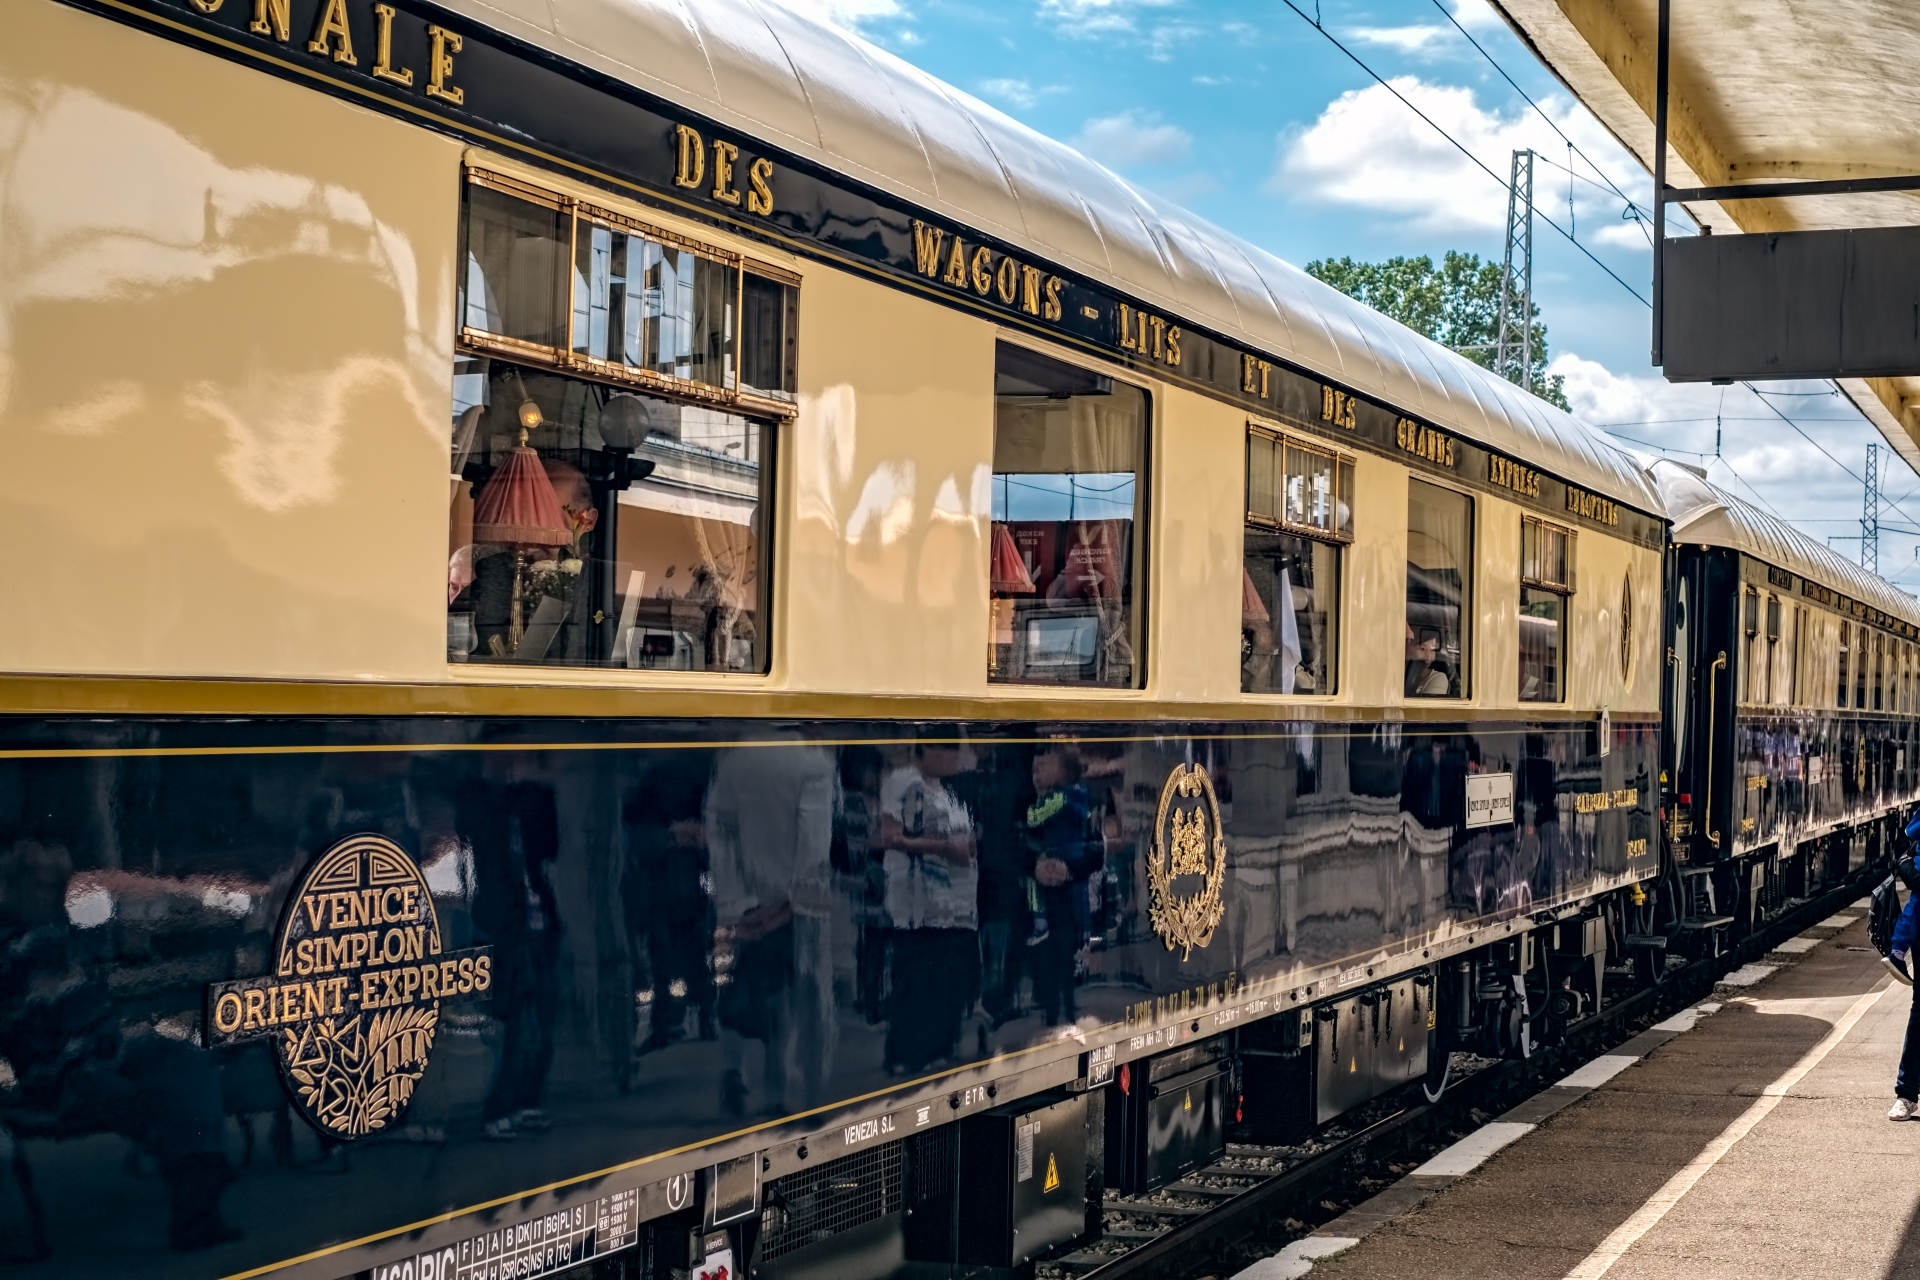 The Orient Express is Scrapping its UK Train Service Due to Brexit